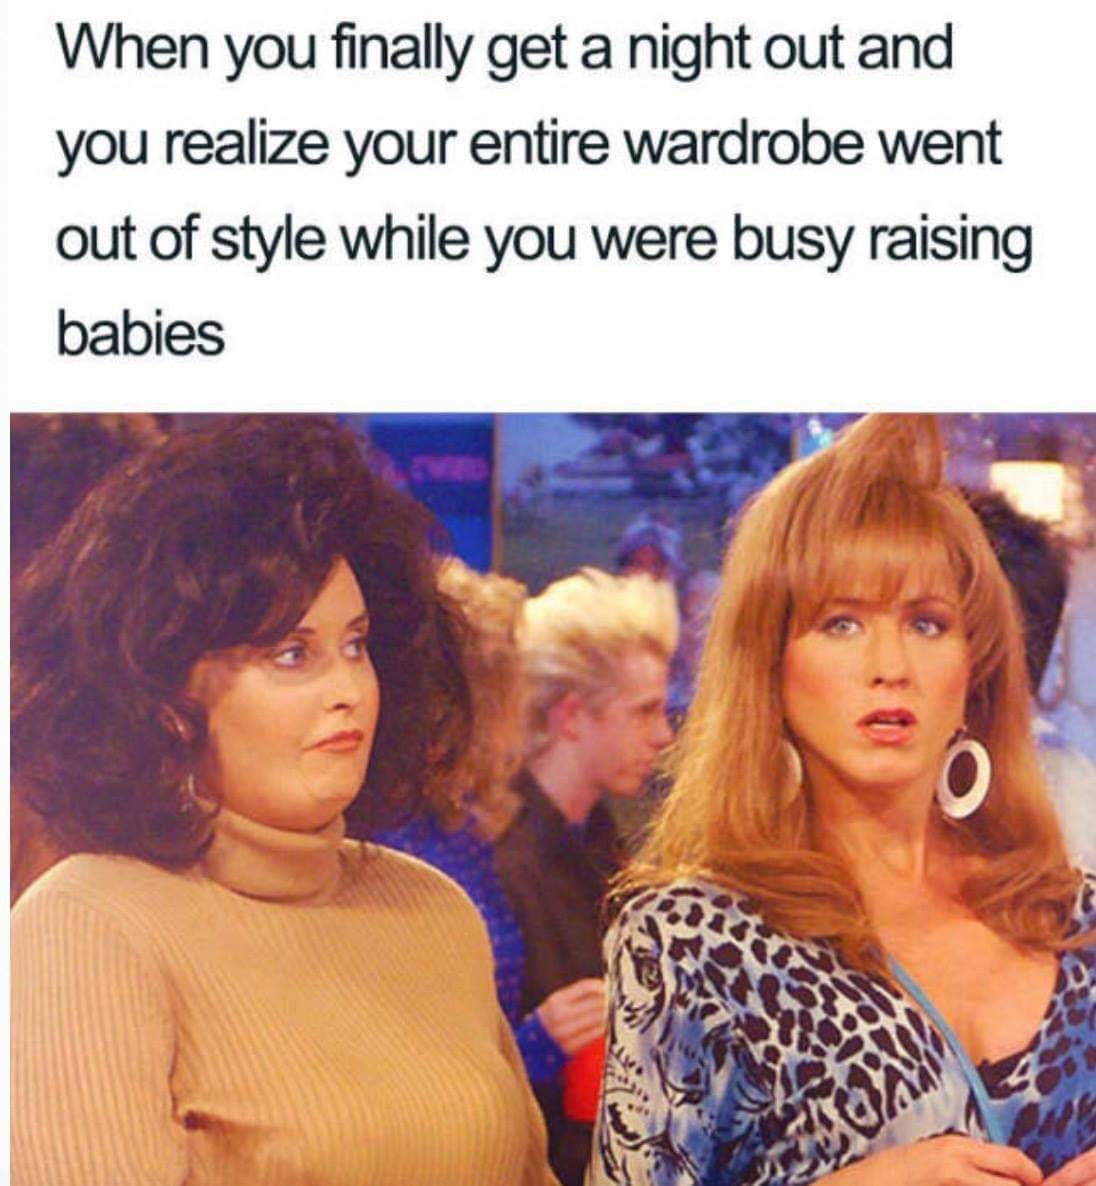 mom going out meme - When you finally get a night out and you realize your entire wardrobe went out of style while you were busy raising babies